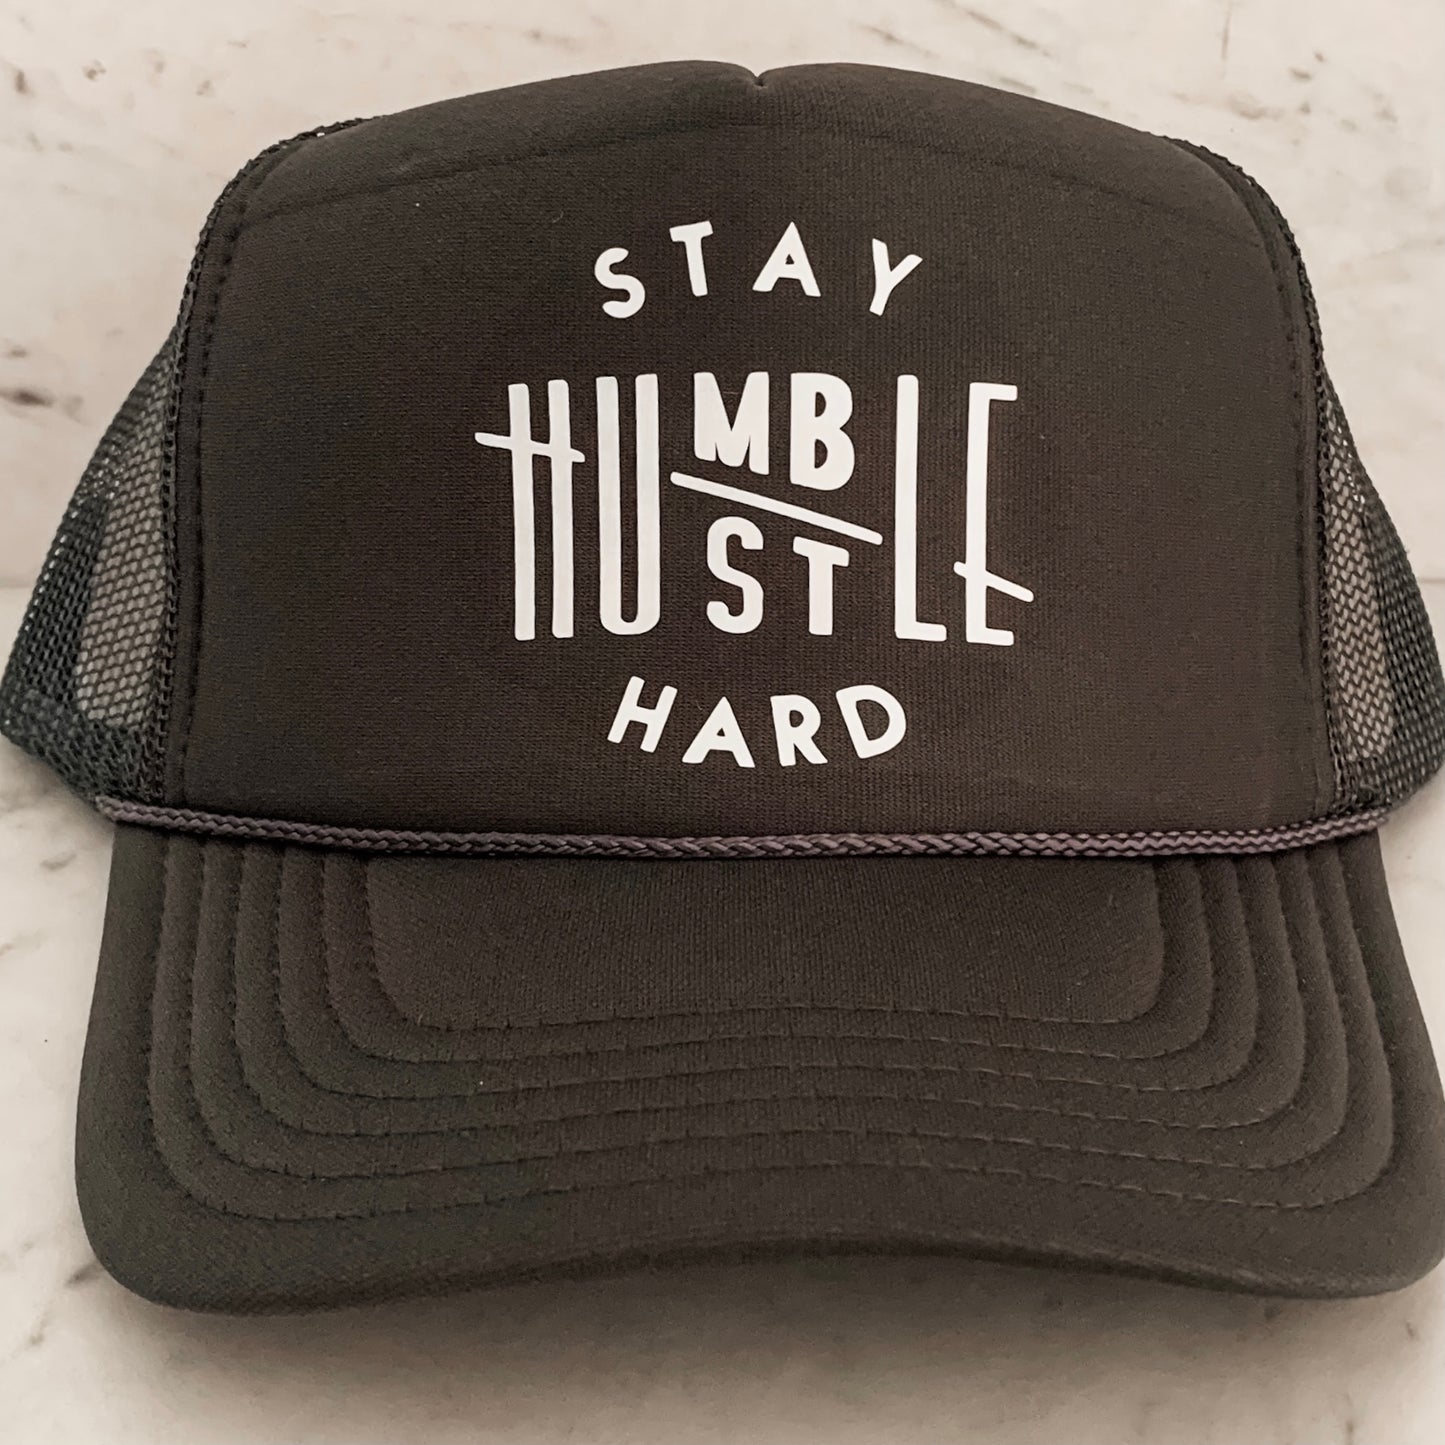 Stay Humble Trucker Hat- Gray & White